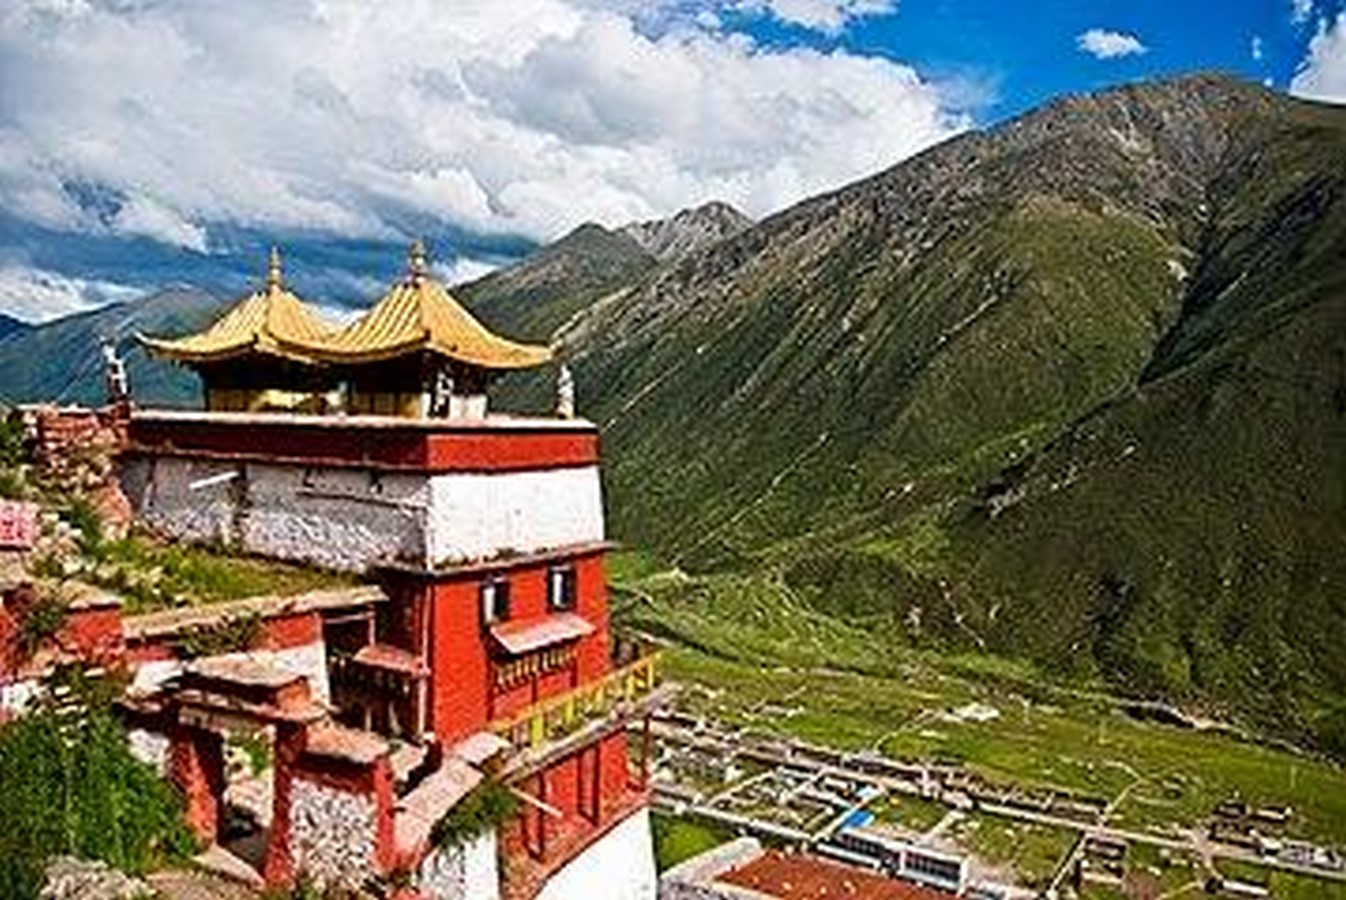 15 Places to visit in Dharamshala for Travelling Architect - Sheet4